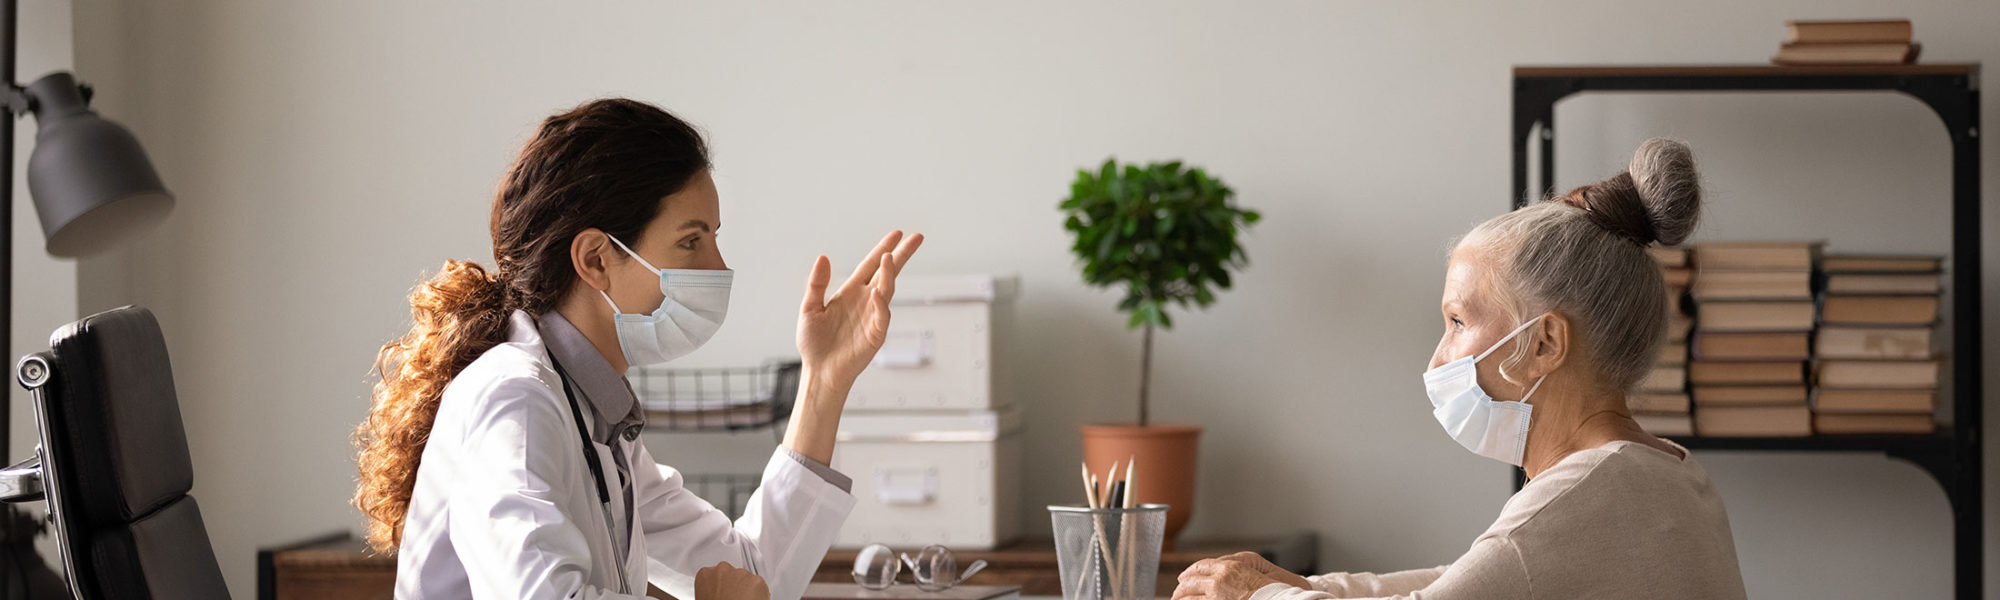 stock photo of patient and doctor talking in office with face mask on